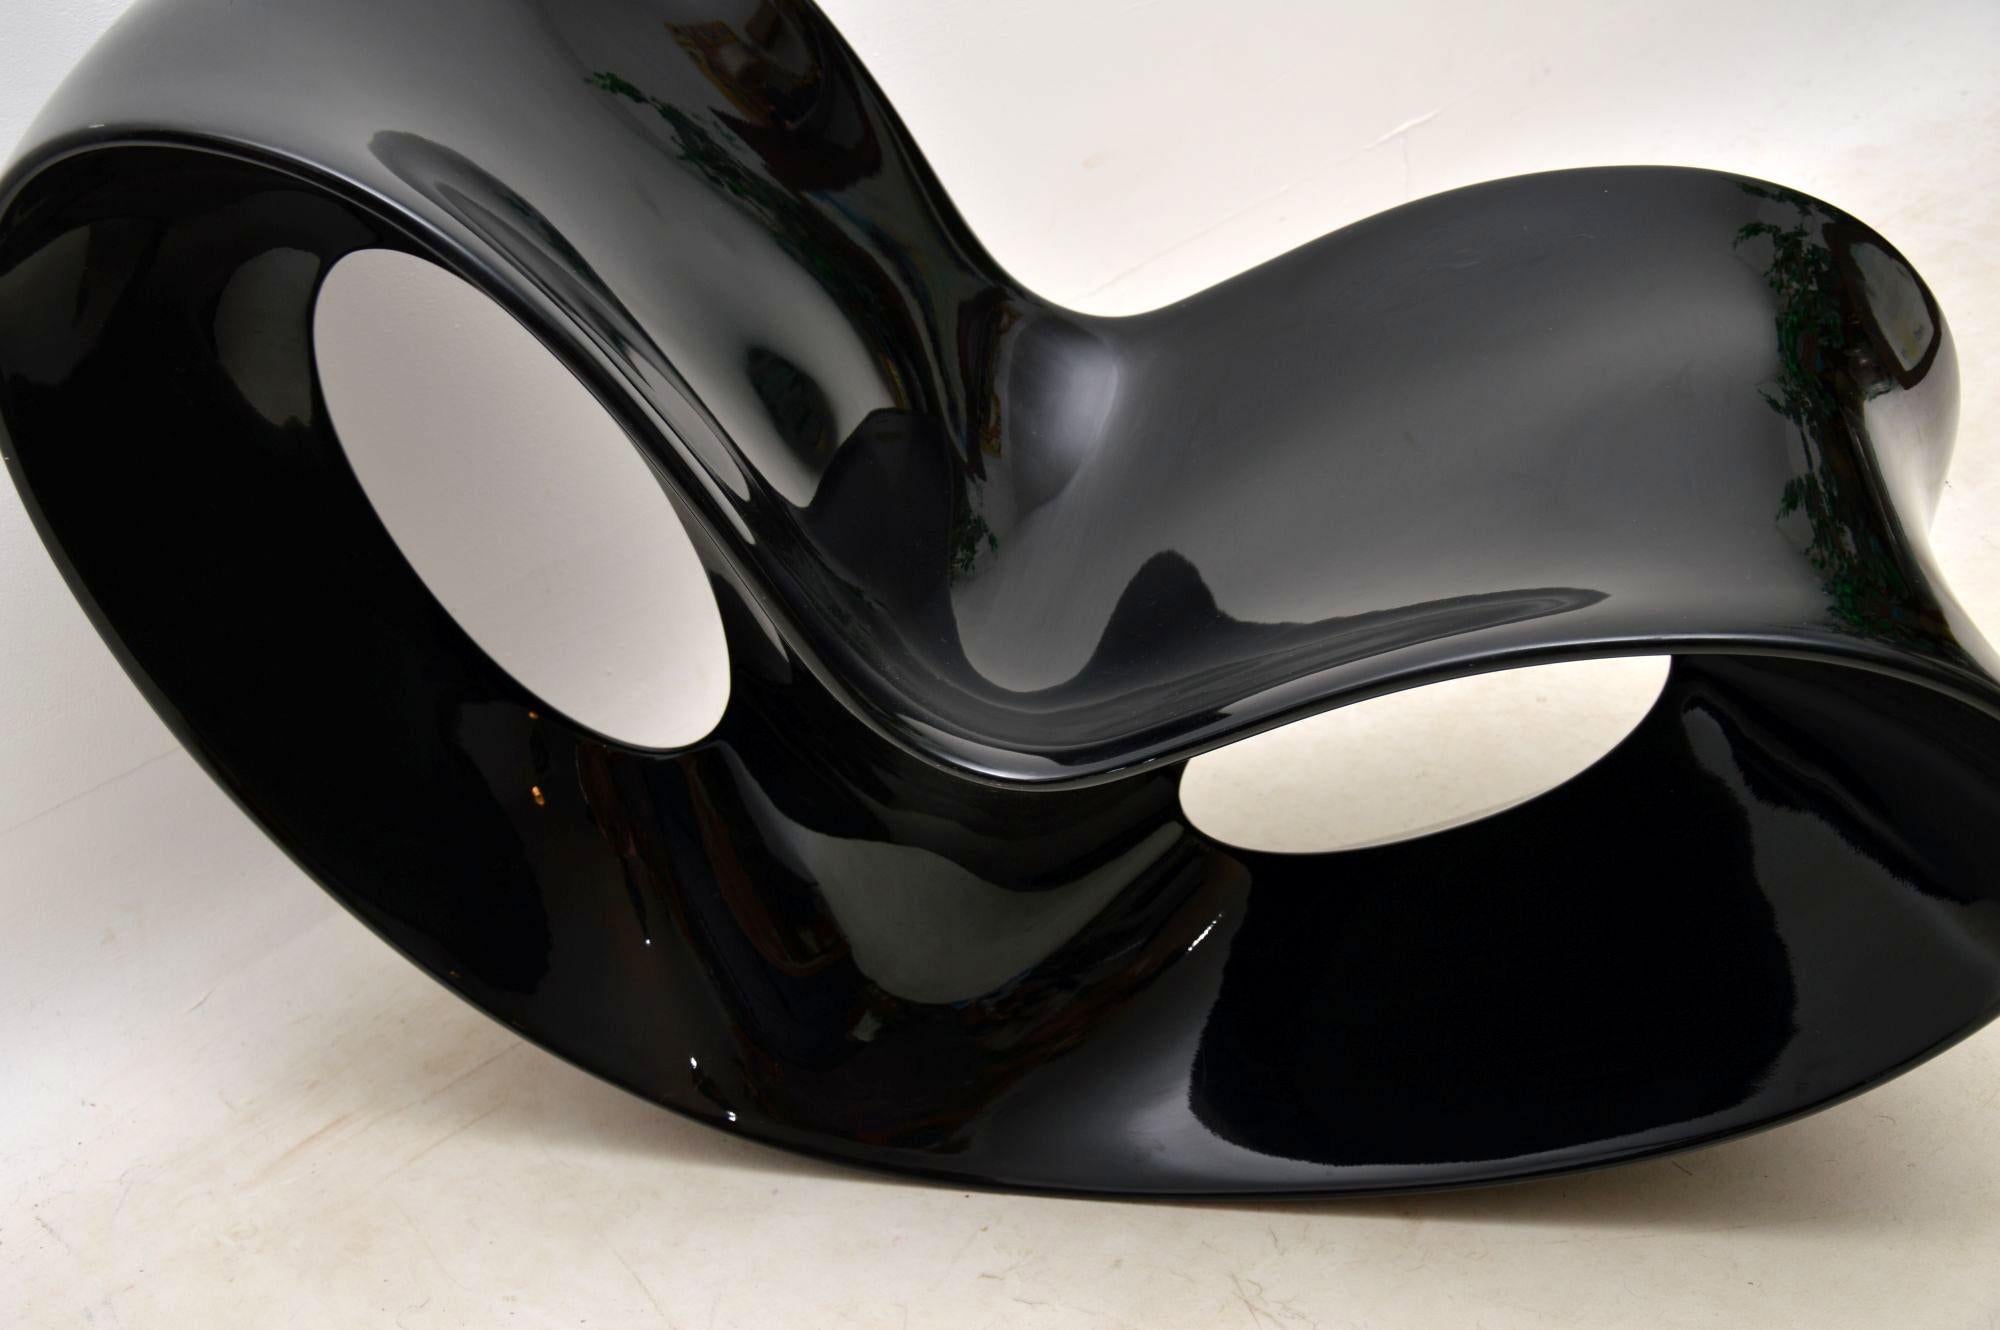 Stunning and Iconic Design, This Is the ‘Voido’ Rocking Chair in a Black Glos 6